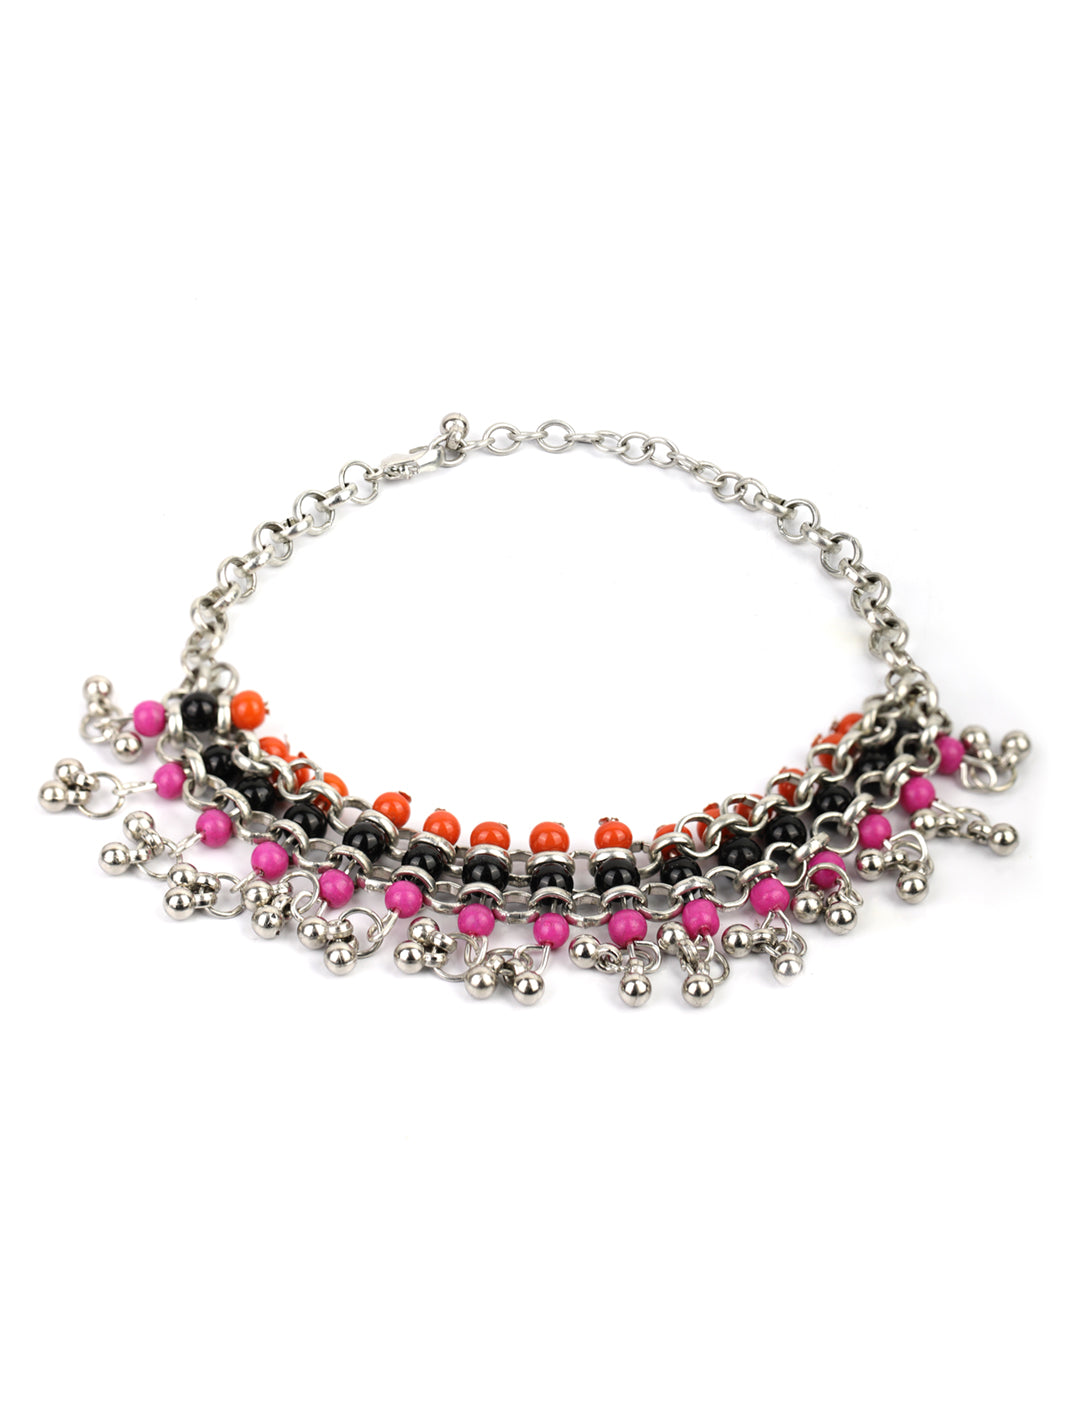 Women's  Multi-Color Beads Ghungroo Silver Plated Anklets - Priyaasi